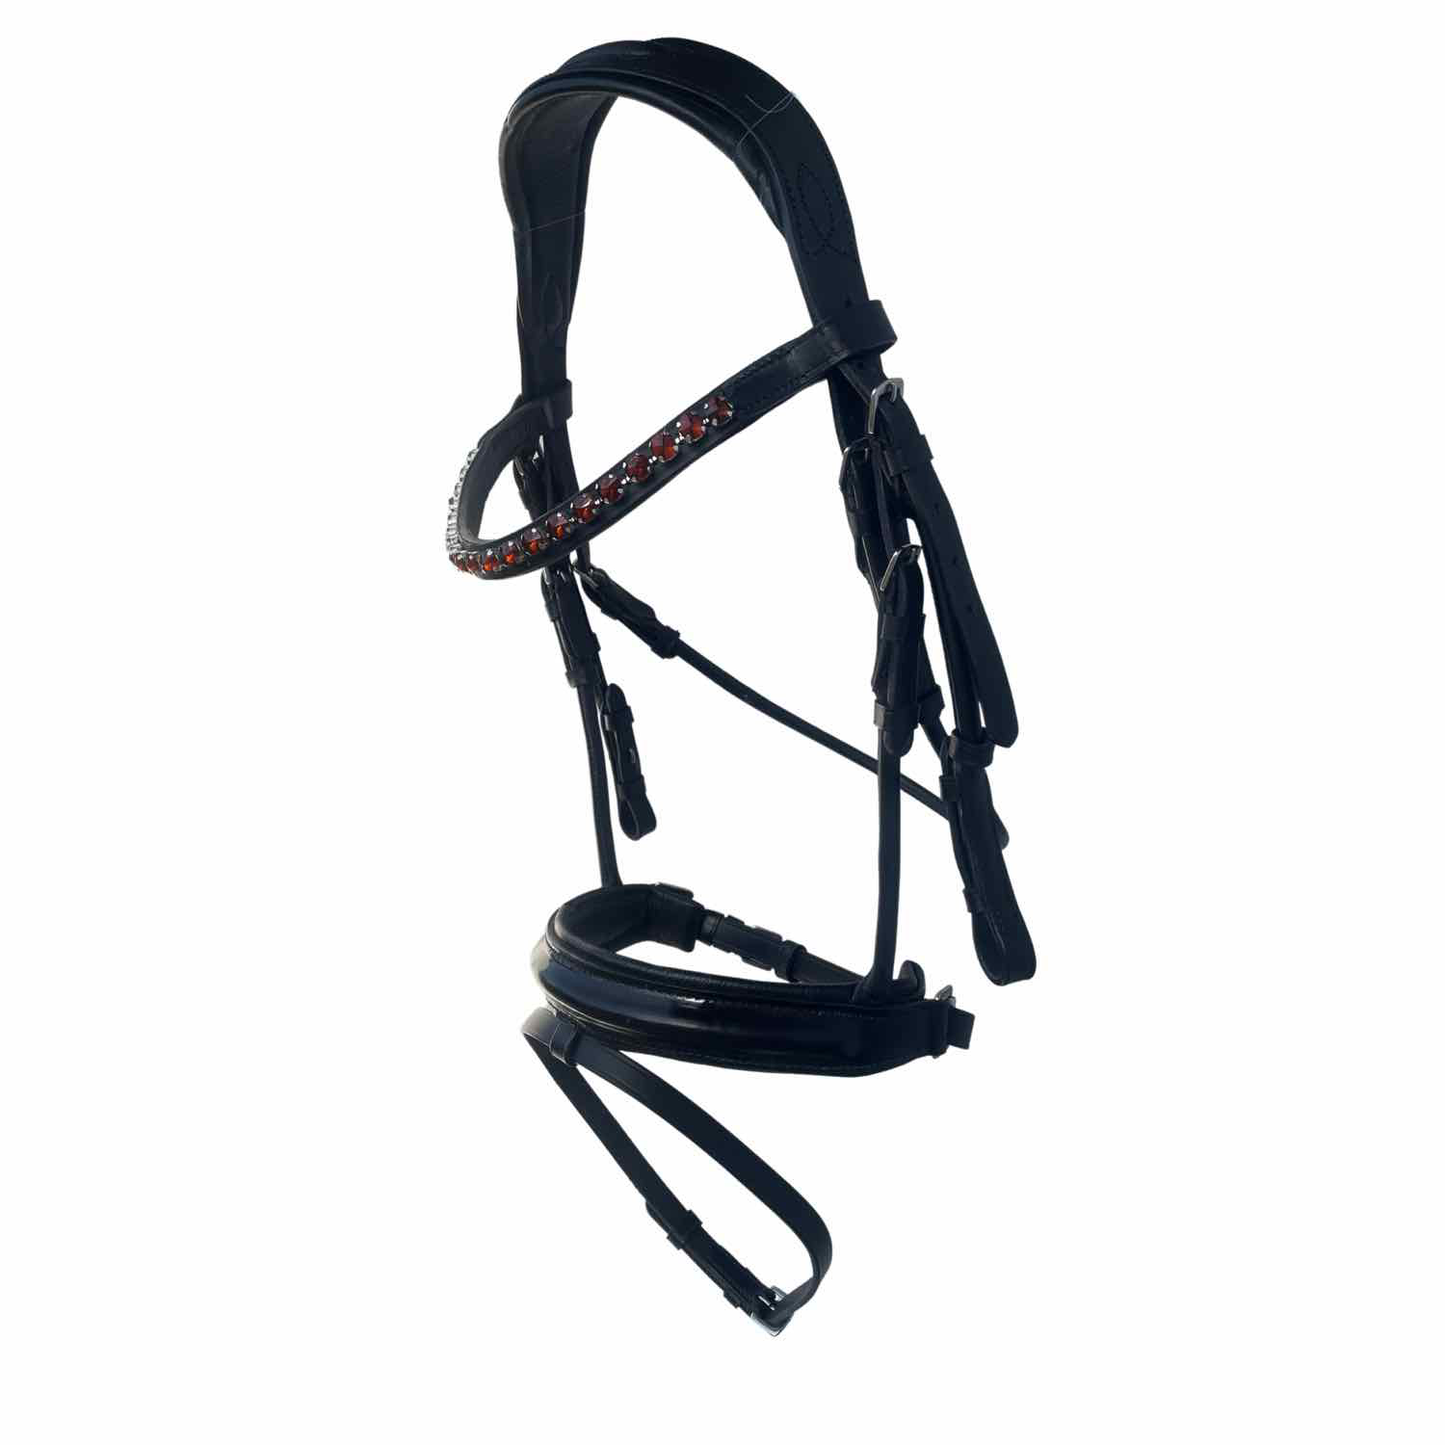 The Ruby Dressage Bridle